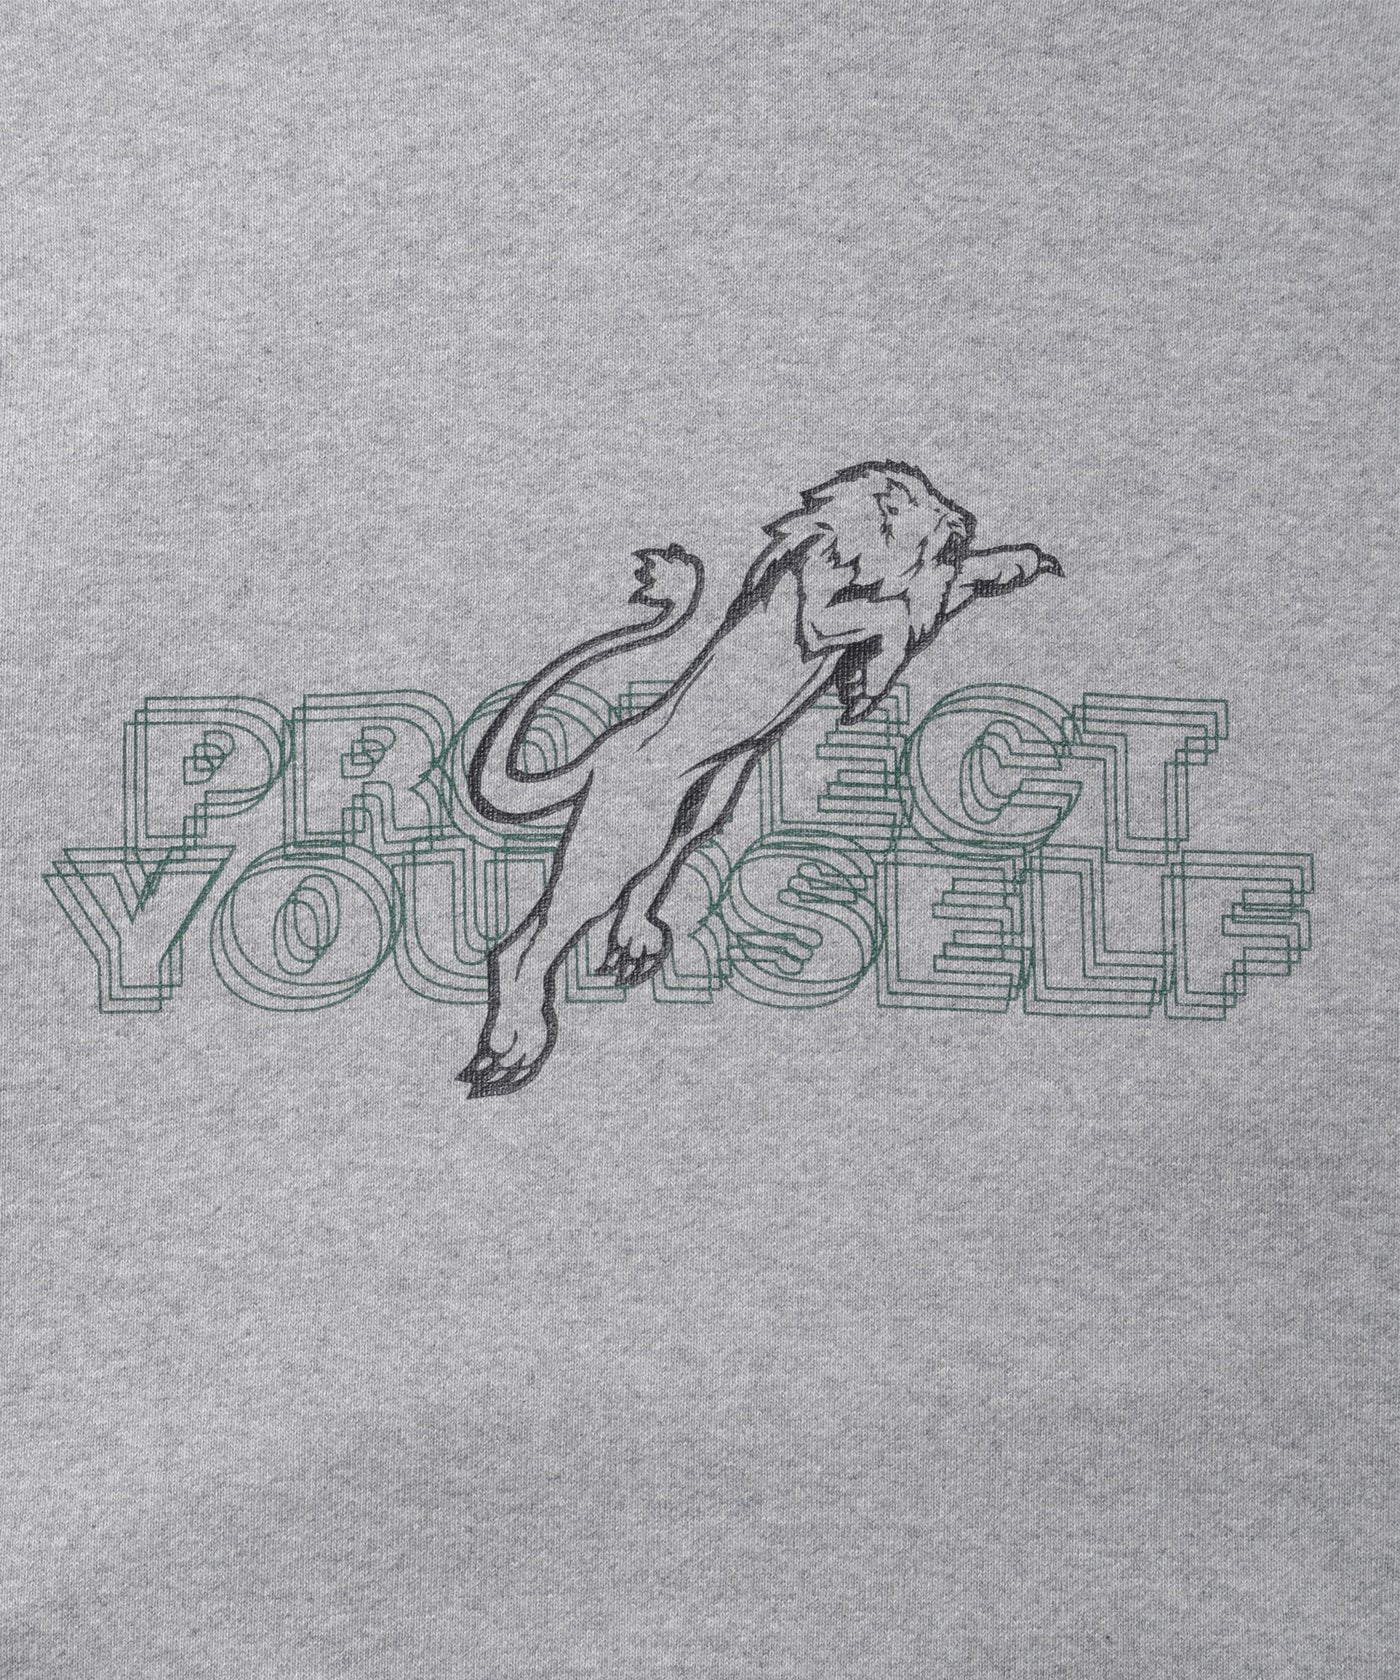 PROTECT YOURSELF HOODIE